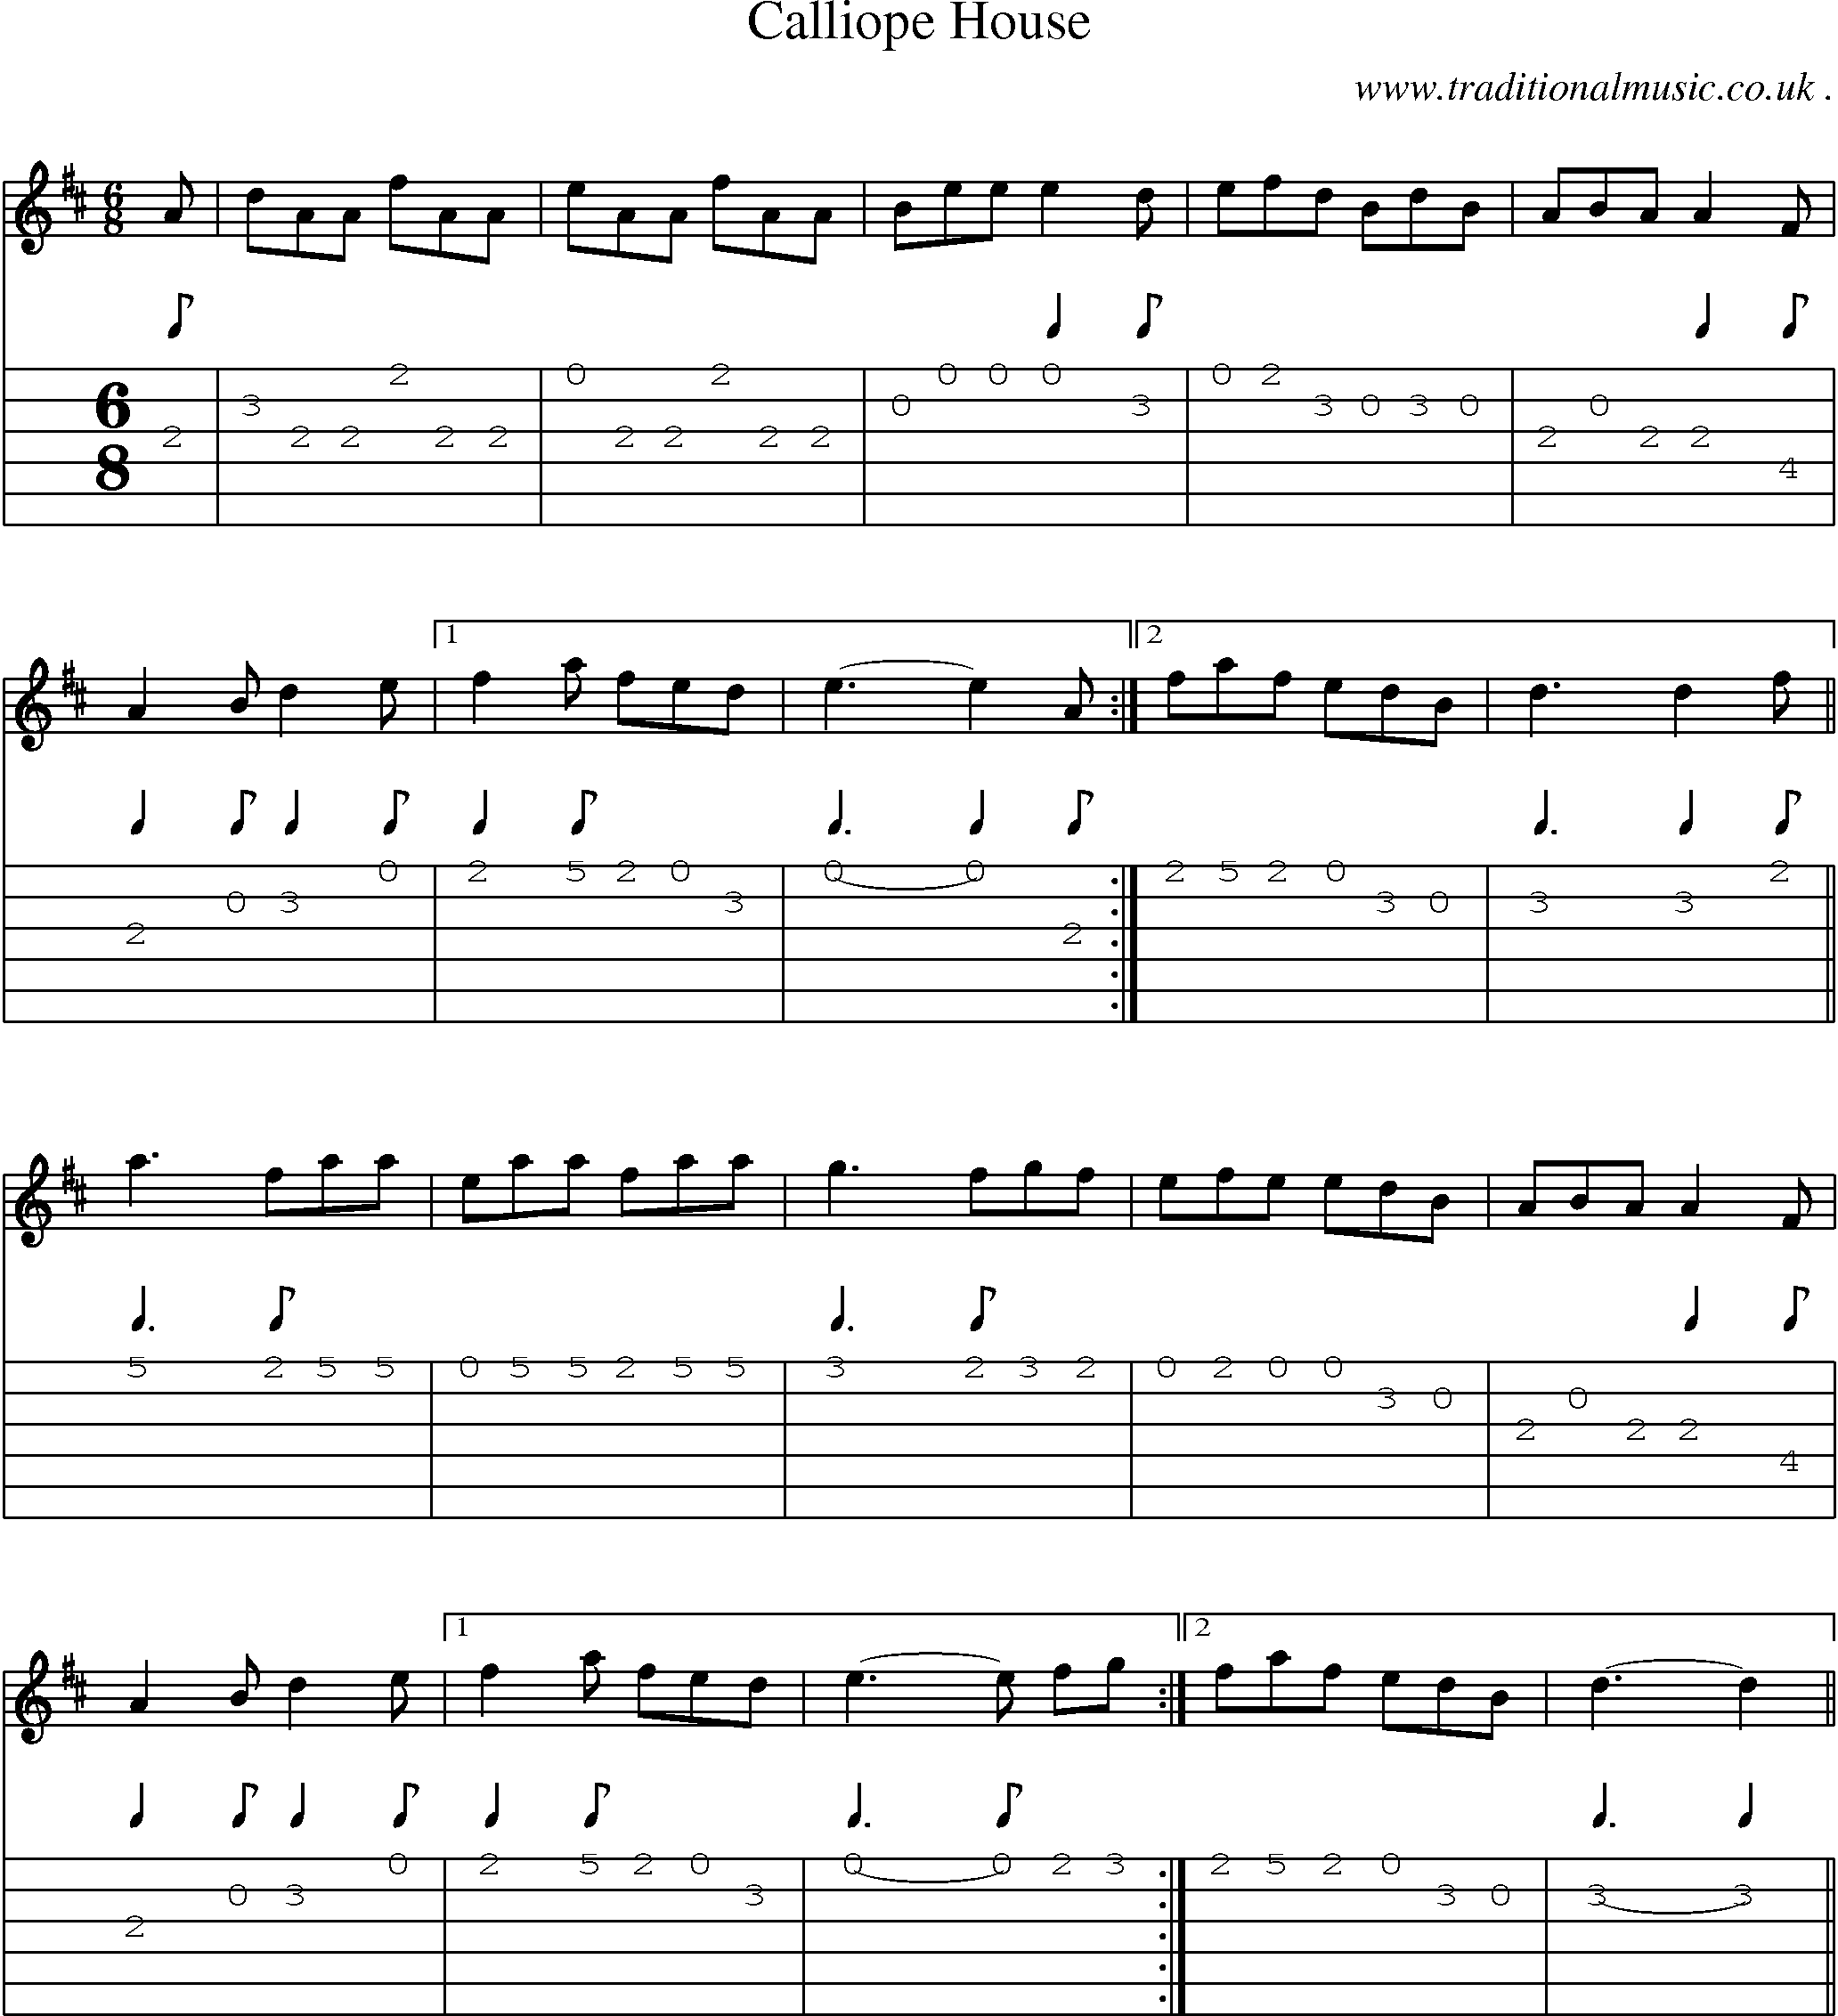 Sheet-Music and Guitar Tabs for Calliope House